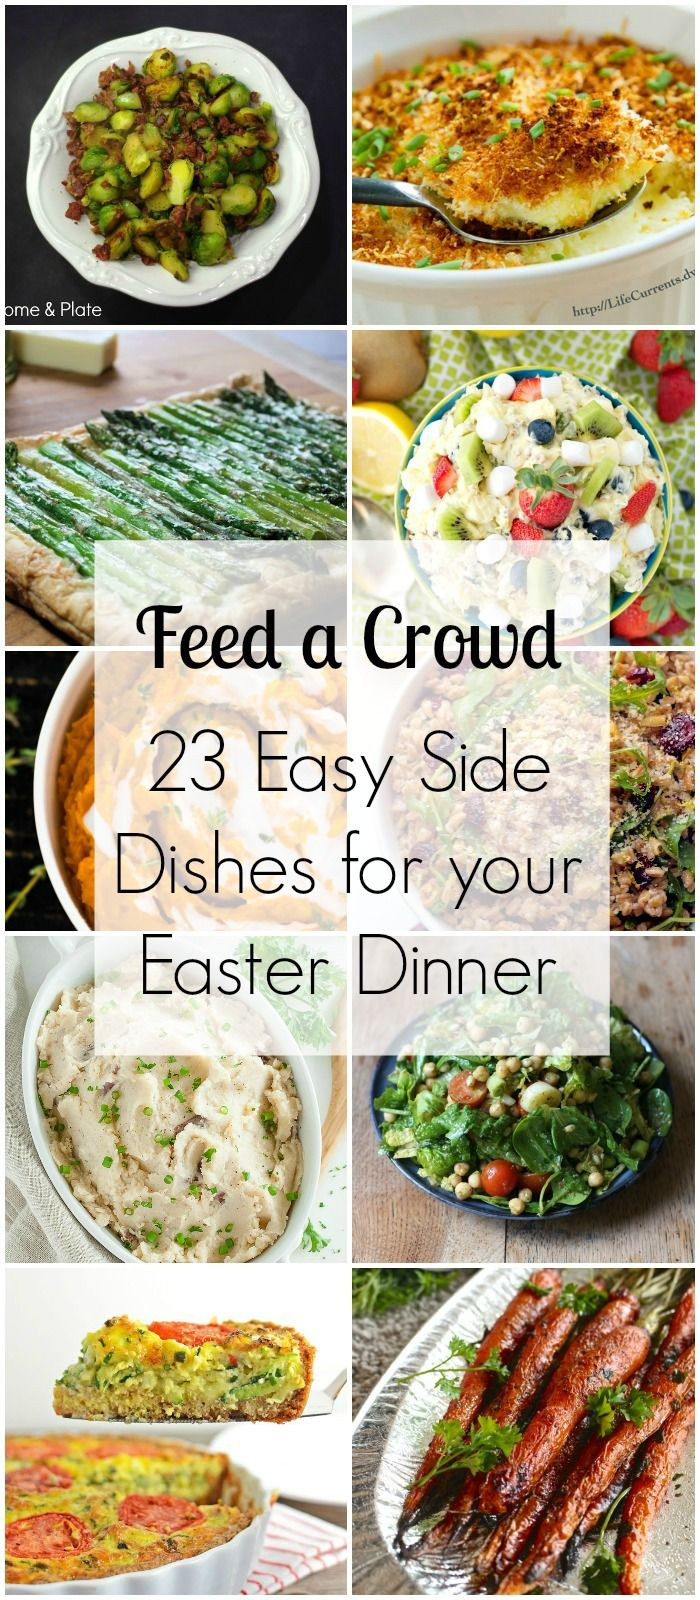 Make Ahead Easter Side Dishes
 Mar 21 23 Easy Side Dishes for your Easter Dinner Feed a